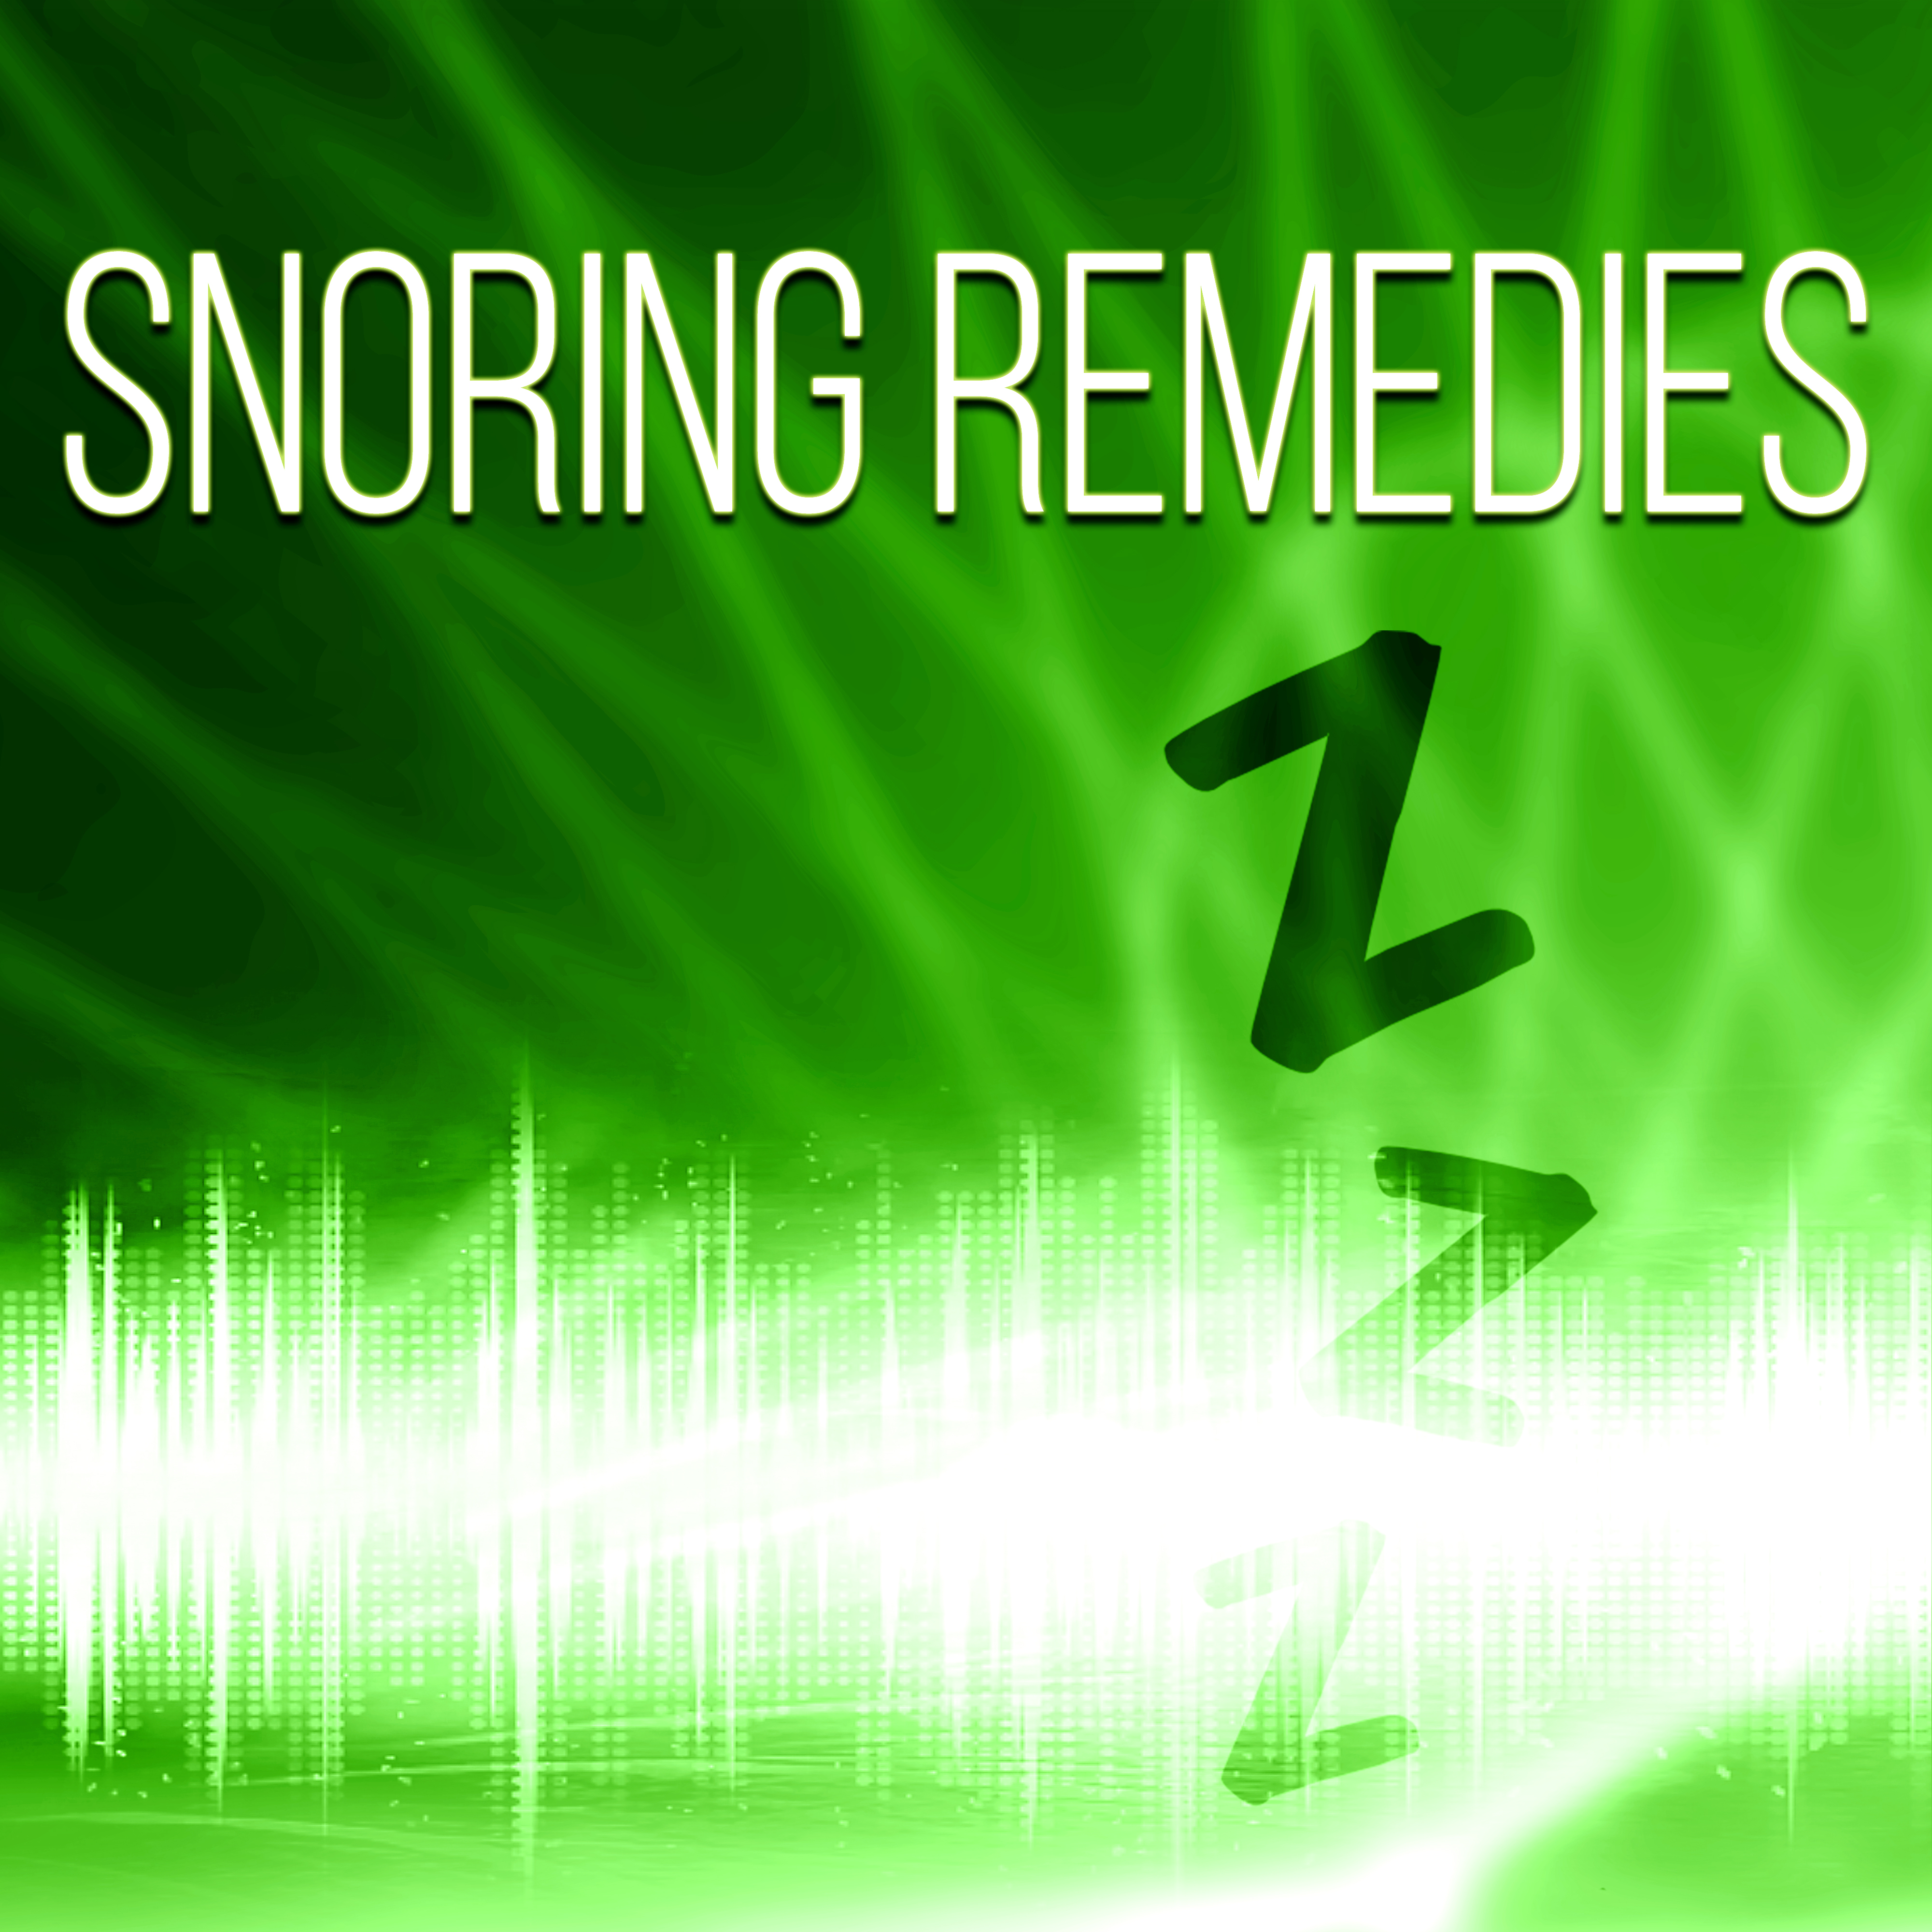 Snoring Remedies  Anti Snore New Age Music for Deep Sleep, Quiet and Peaceful Night, Snoring Solutions, Insomnia Cures, Lullaby Songs